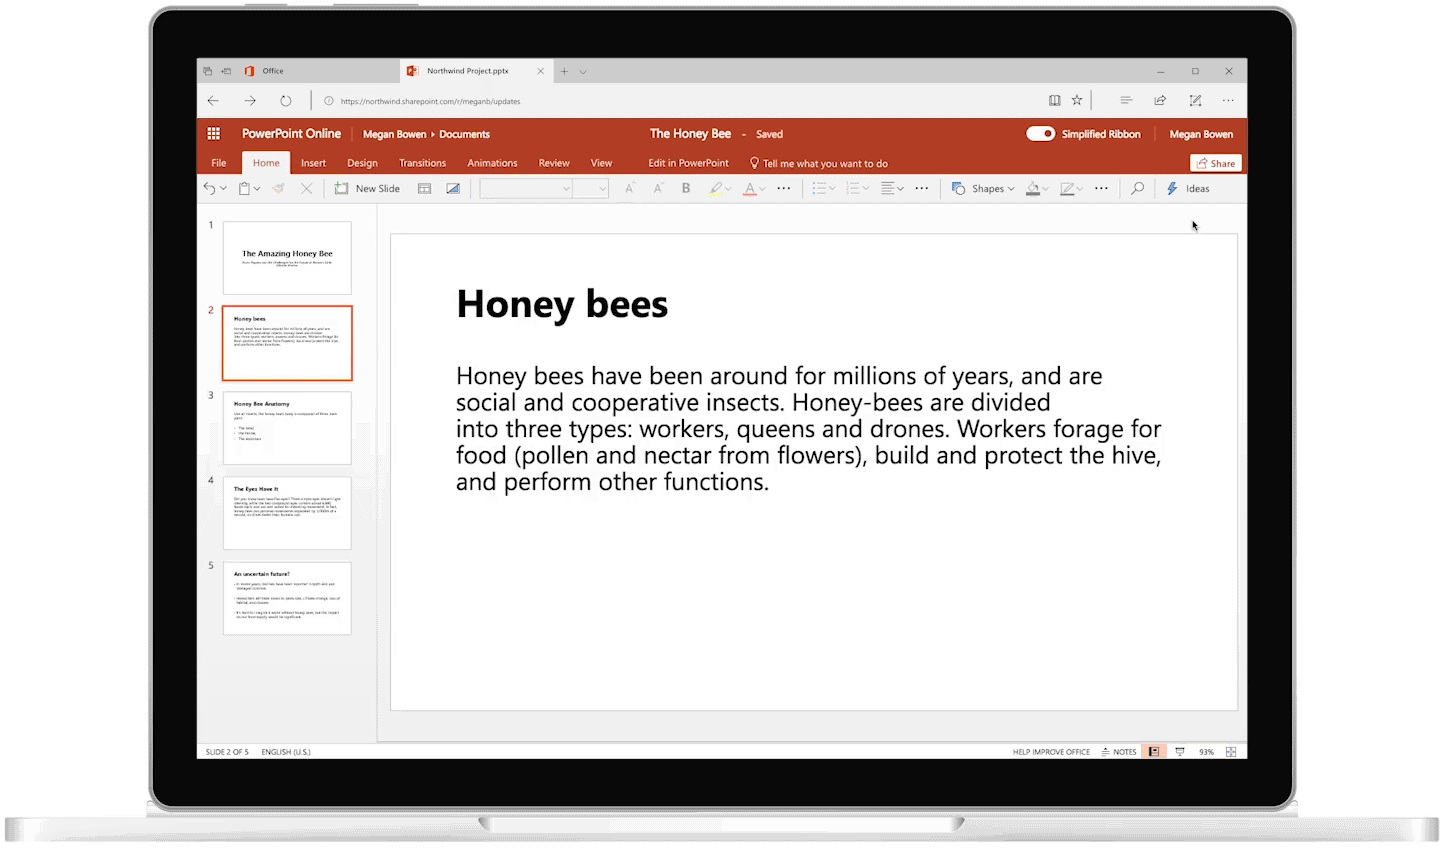 PowerPoint presentation showing in device